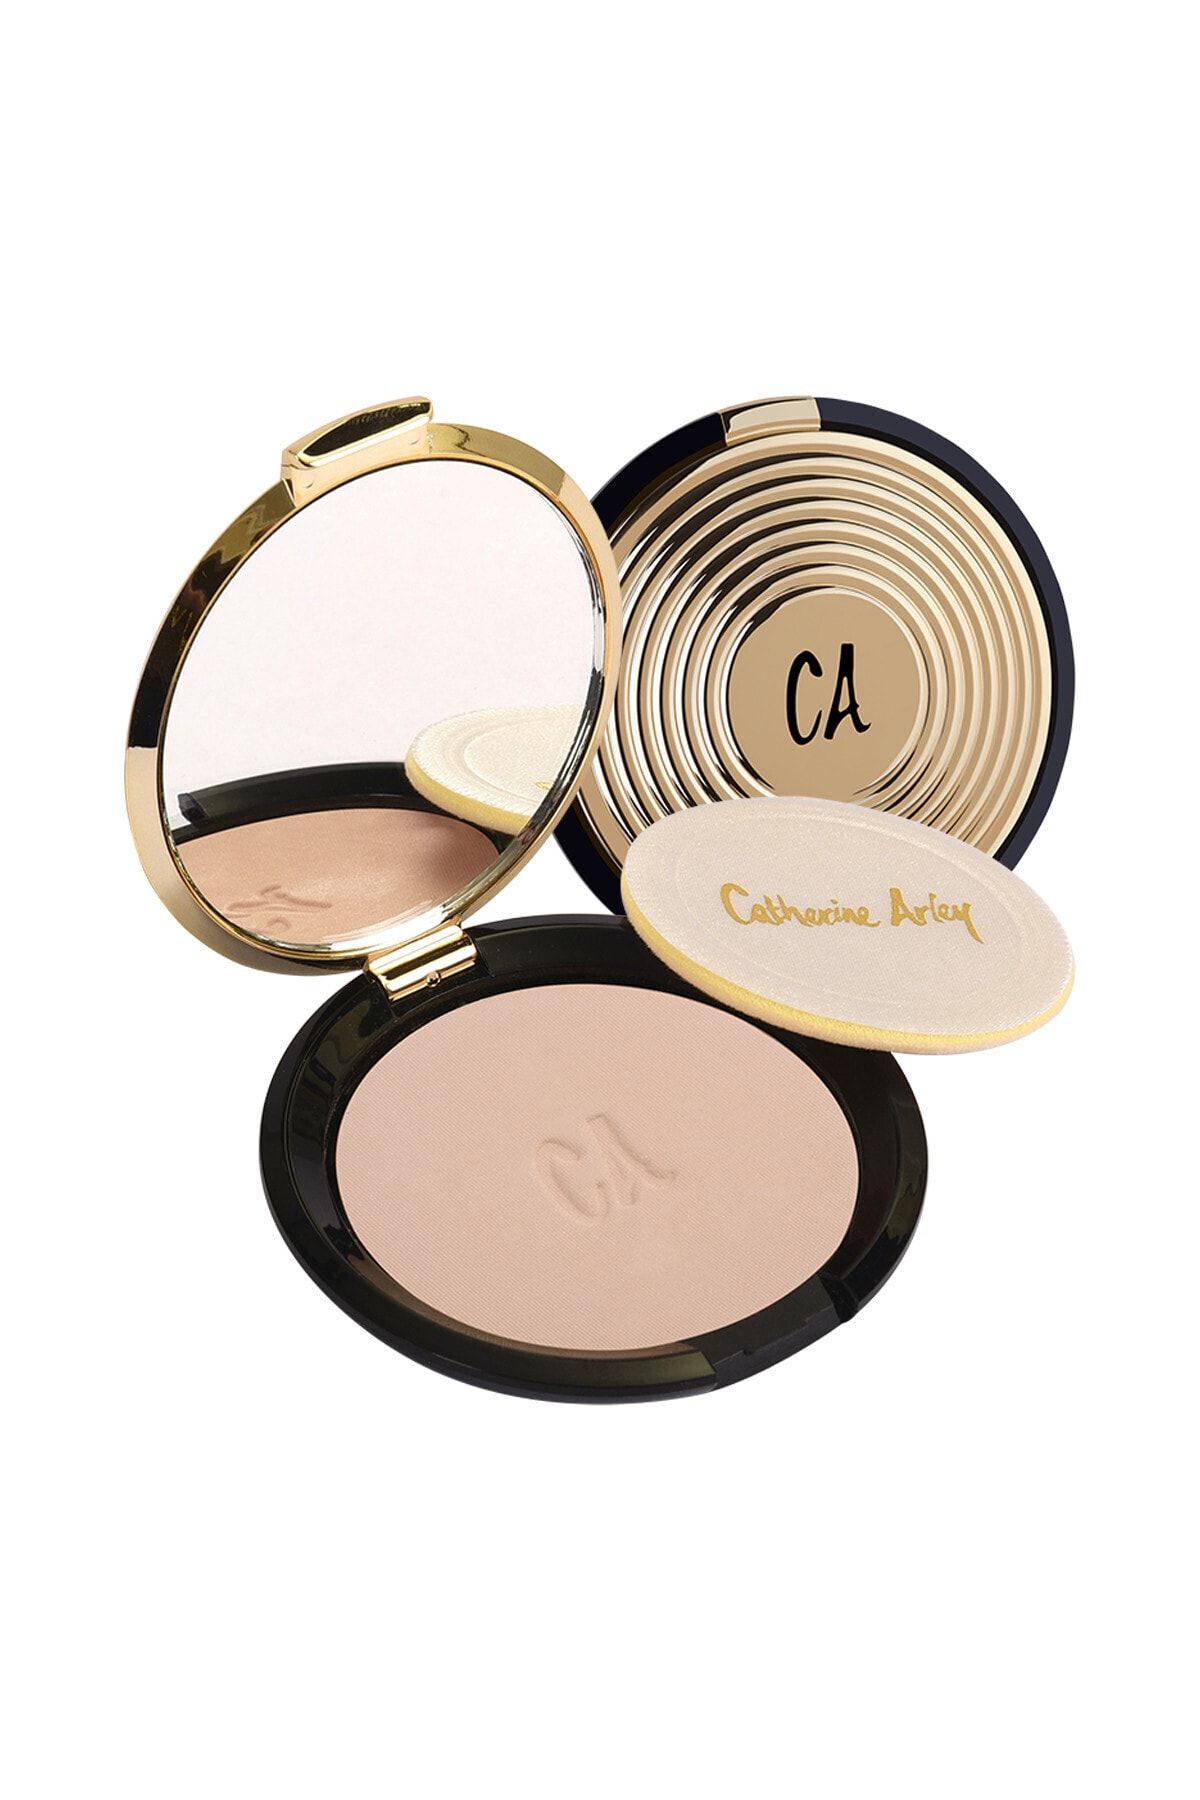 Catherine Arley Gold Compact Powder (Gold Pudra) - 101 -